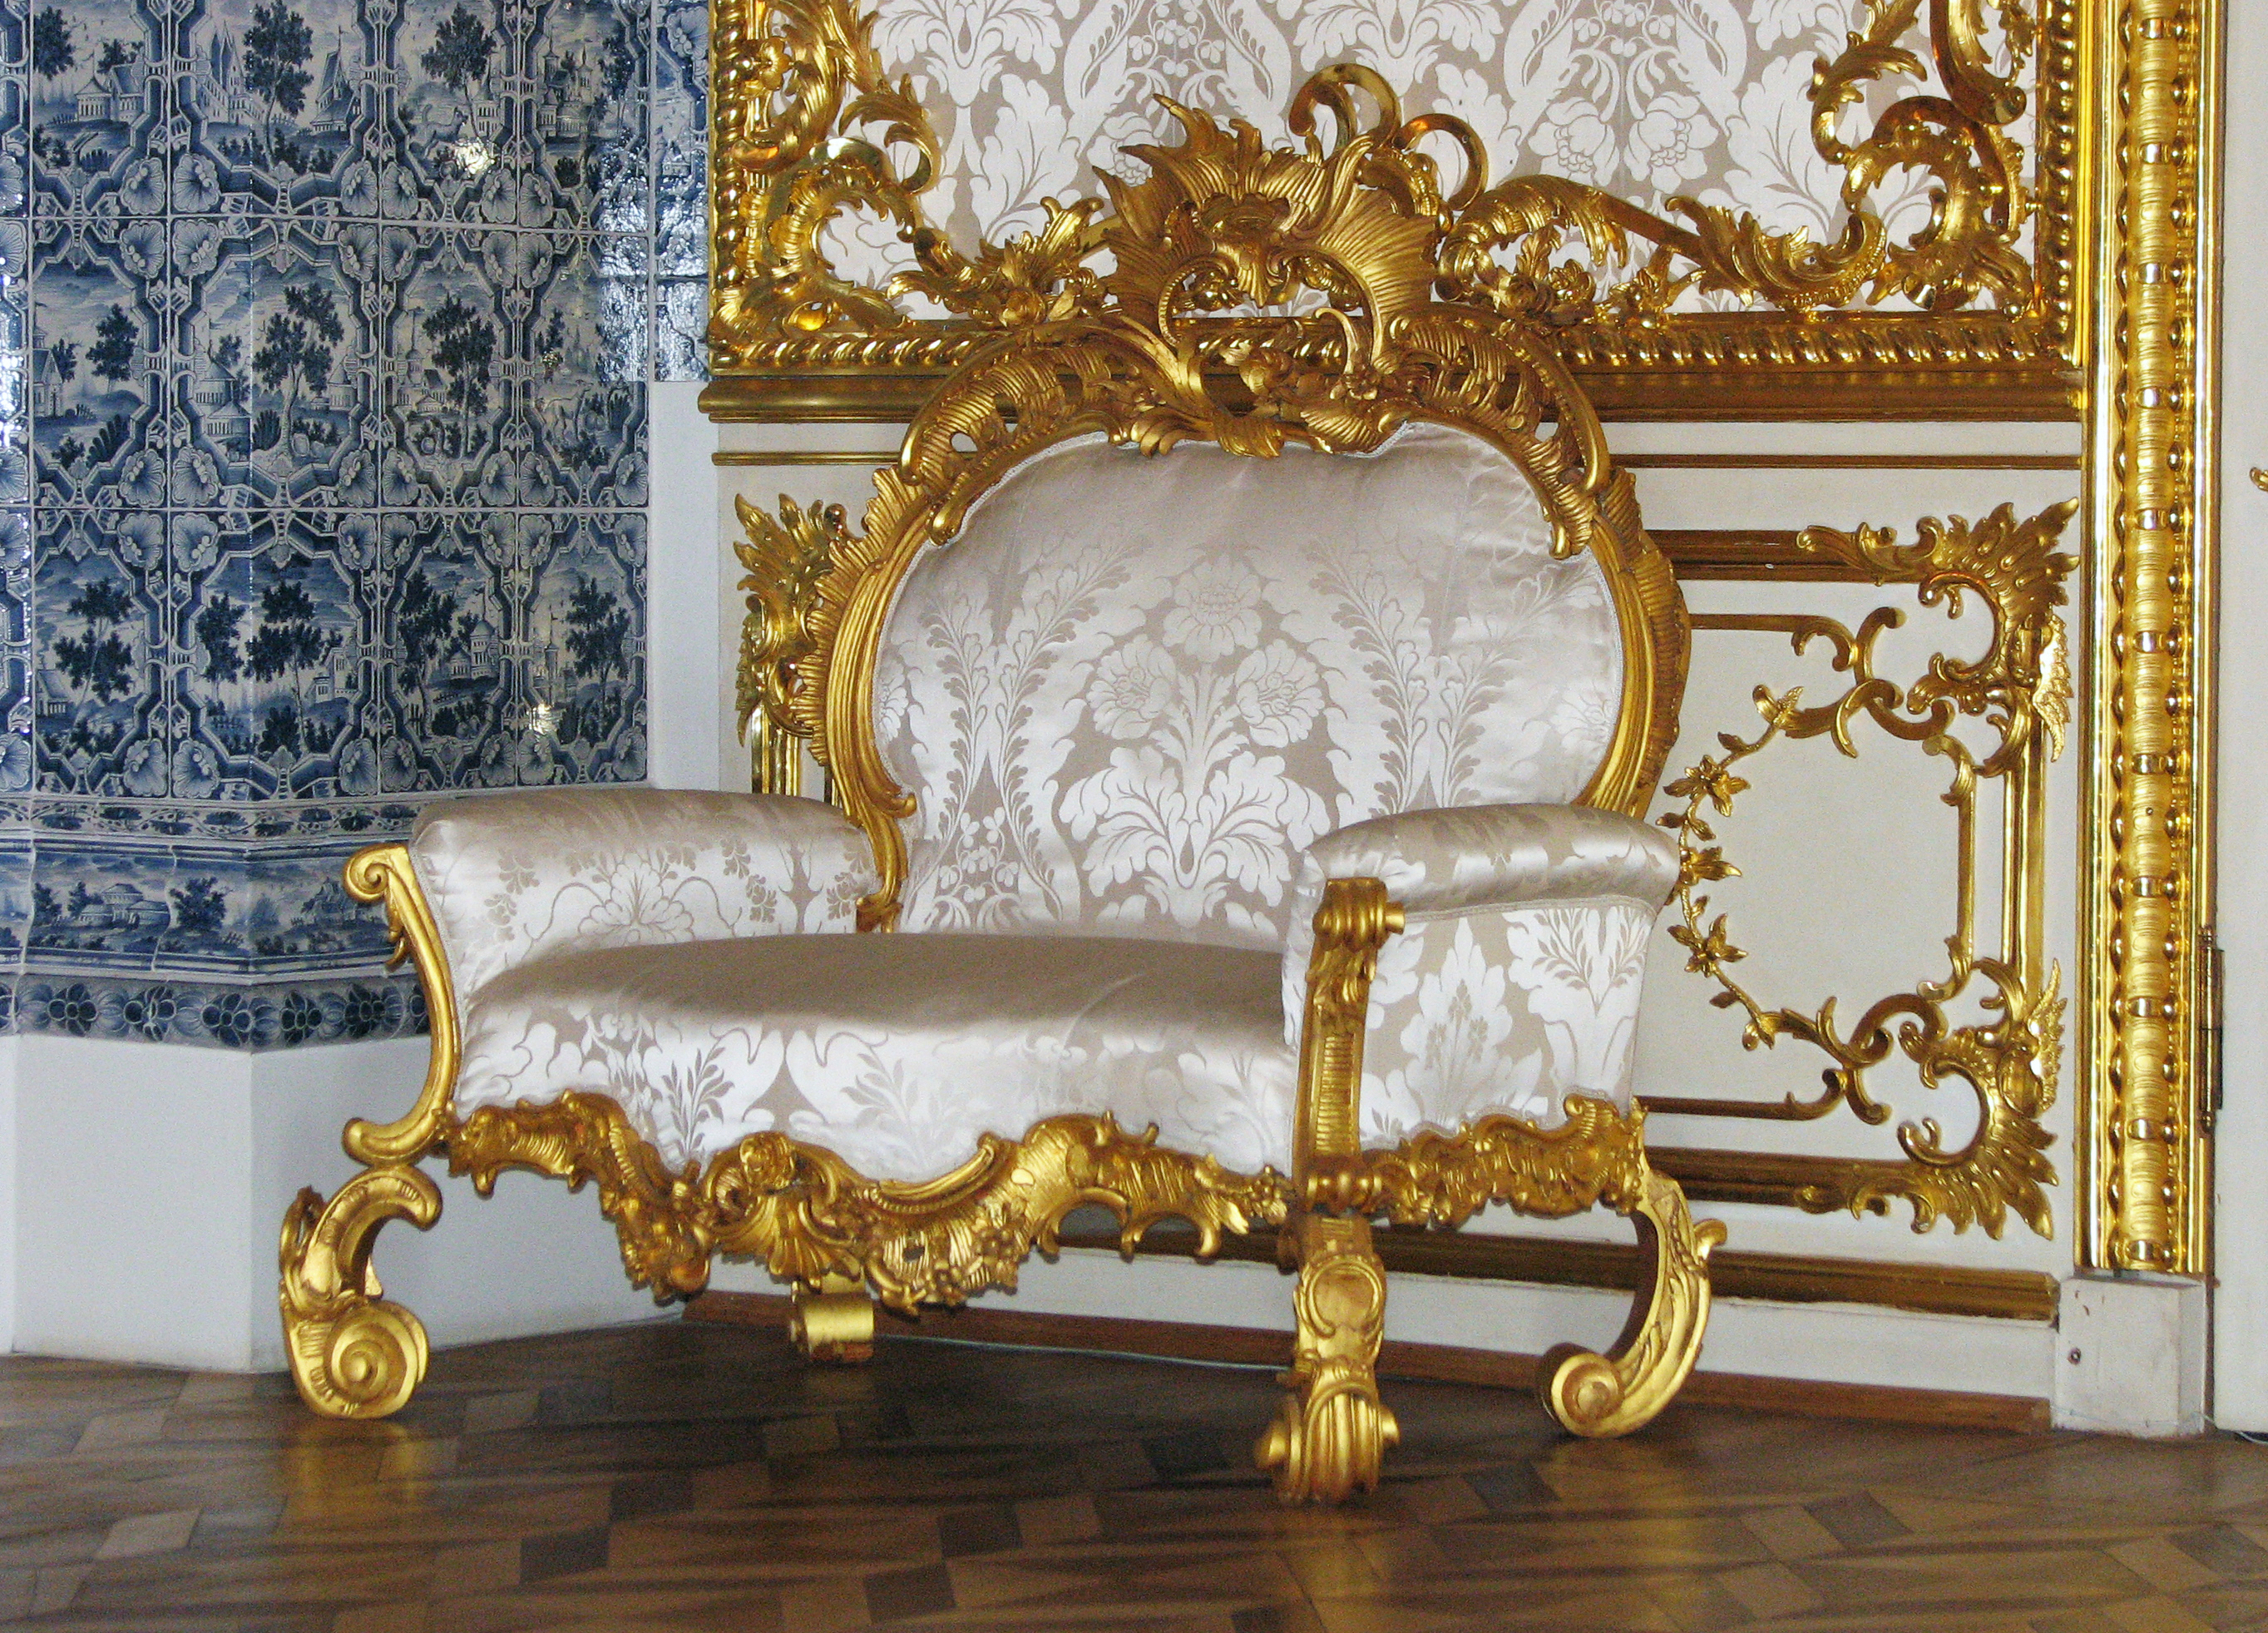 File:Armchair in baroque style 01.jpg - Wikimedia Commons